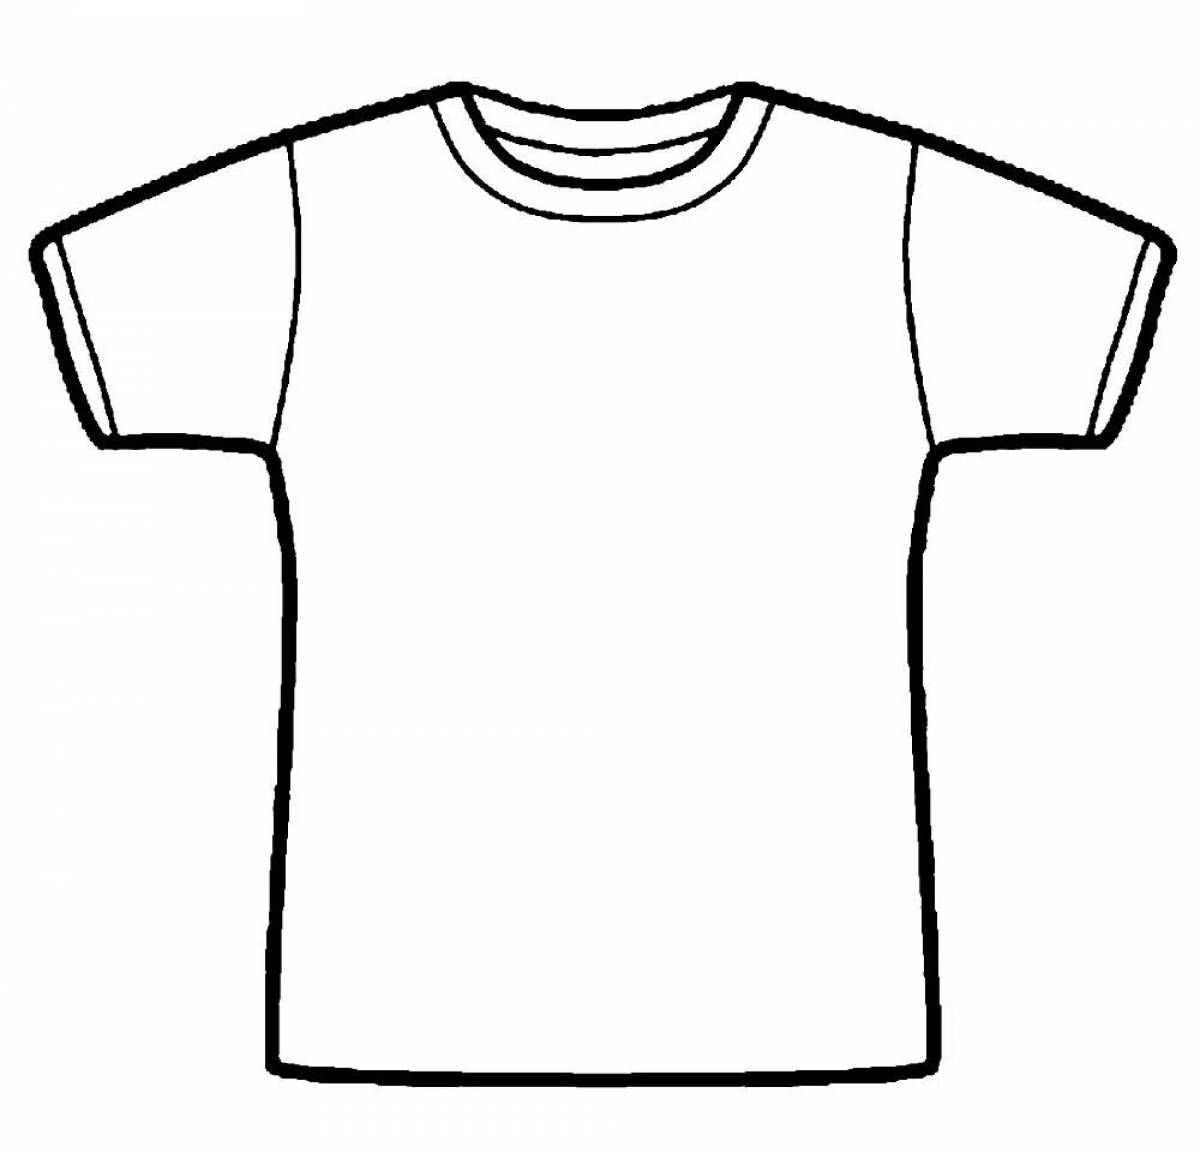 Colorful coloring of t-shirts for children to develop self-expression